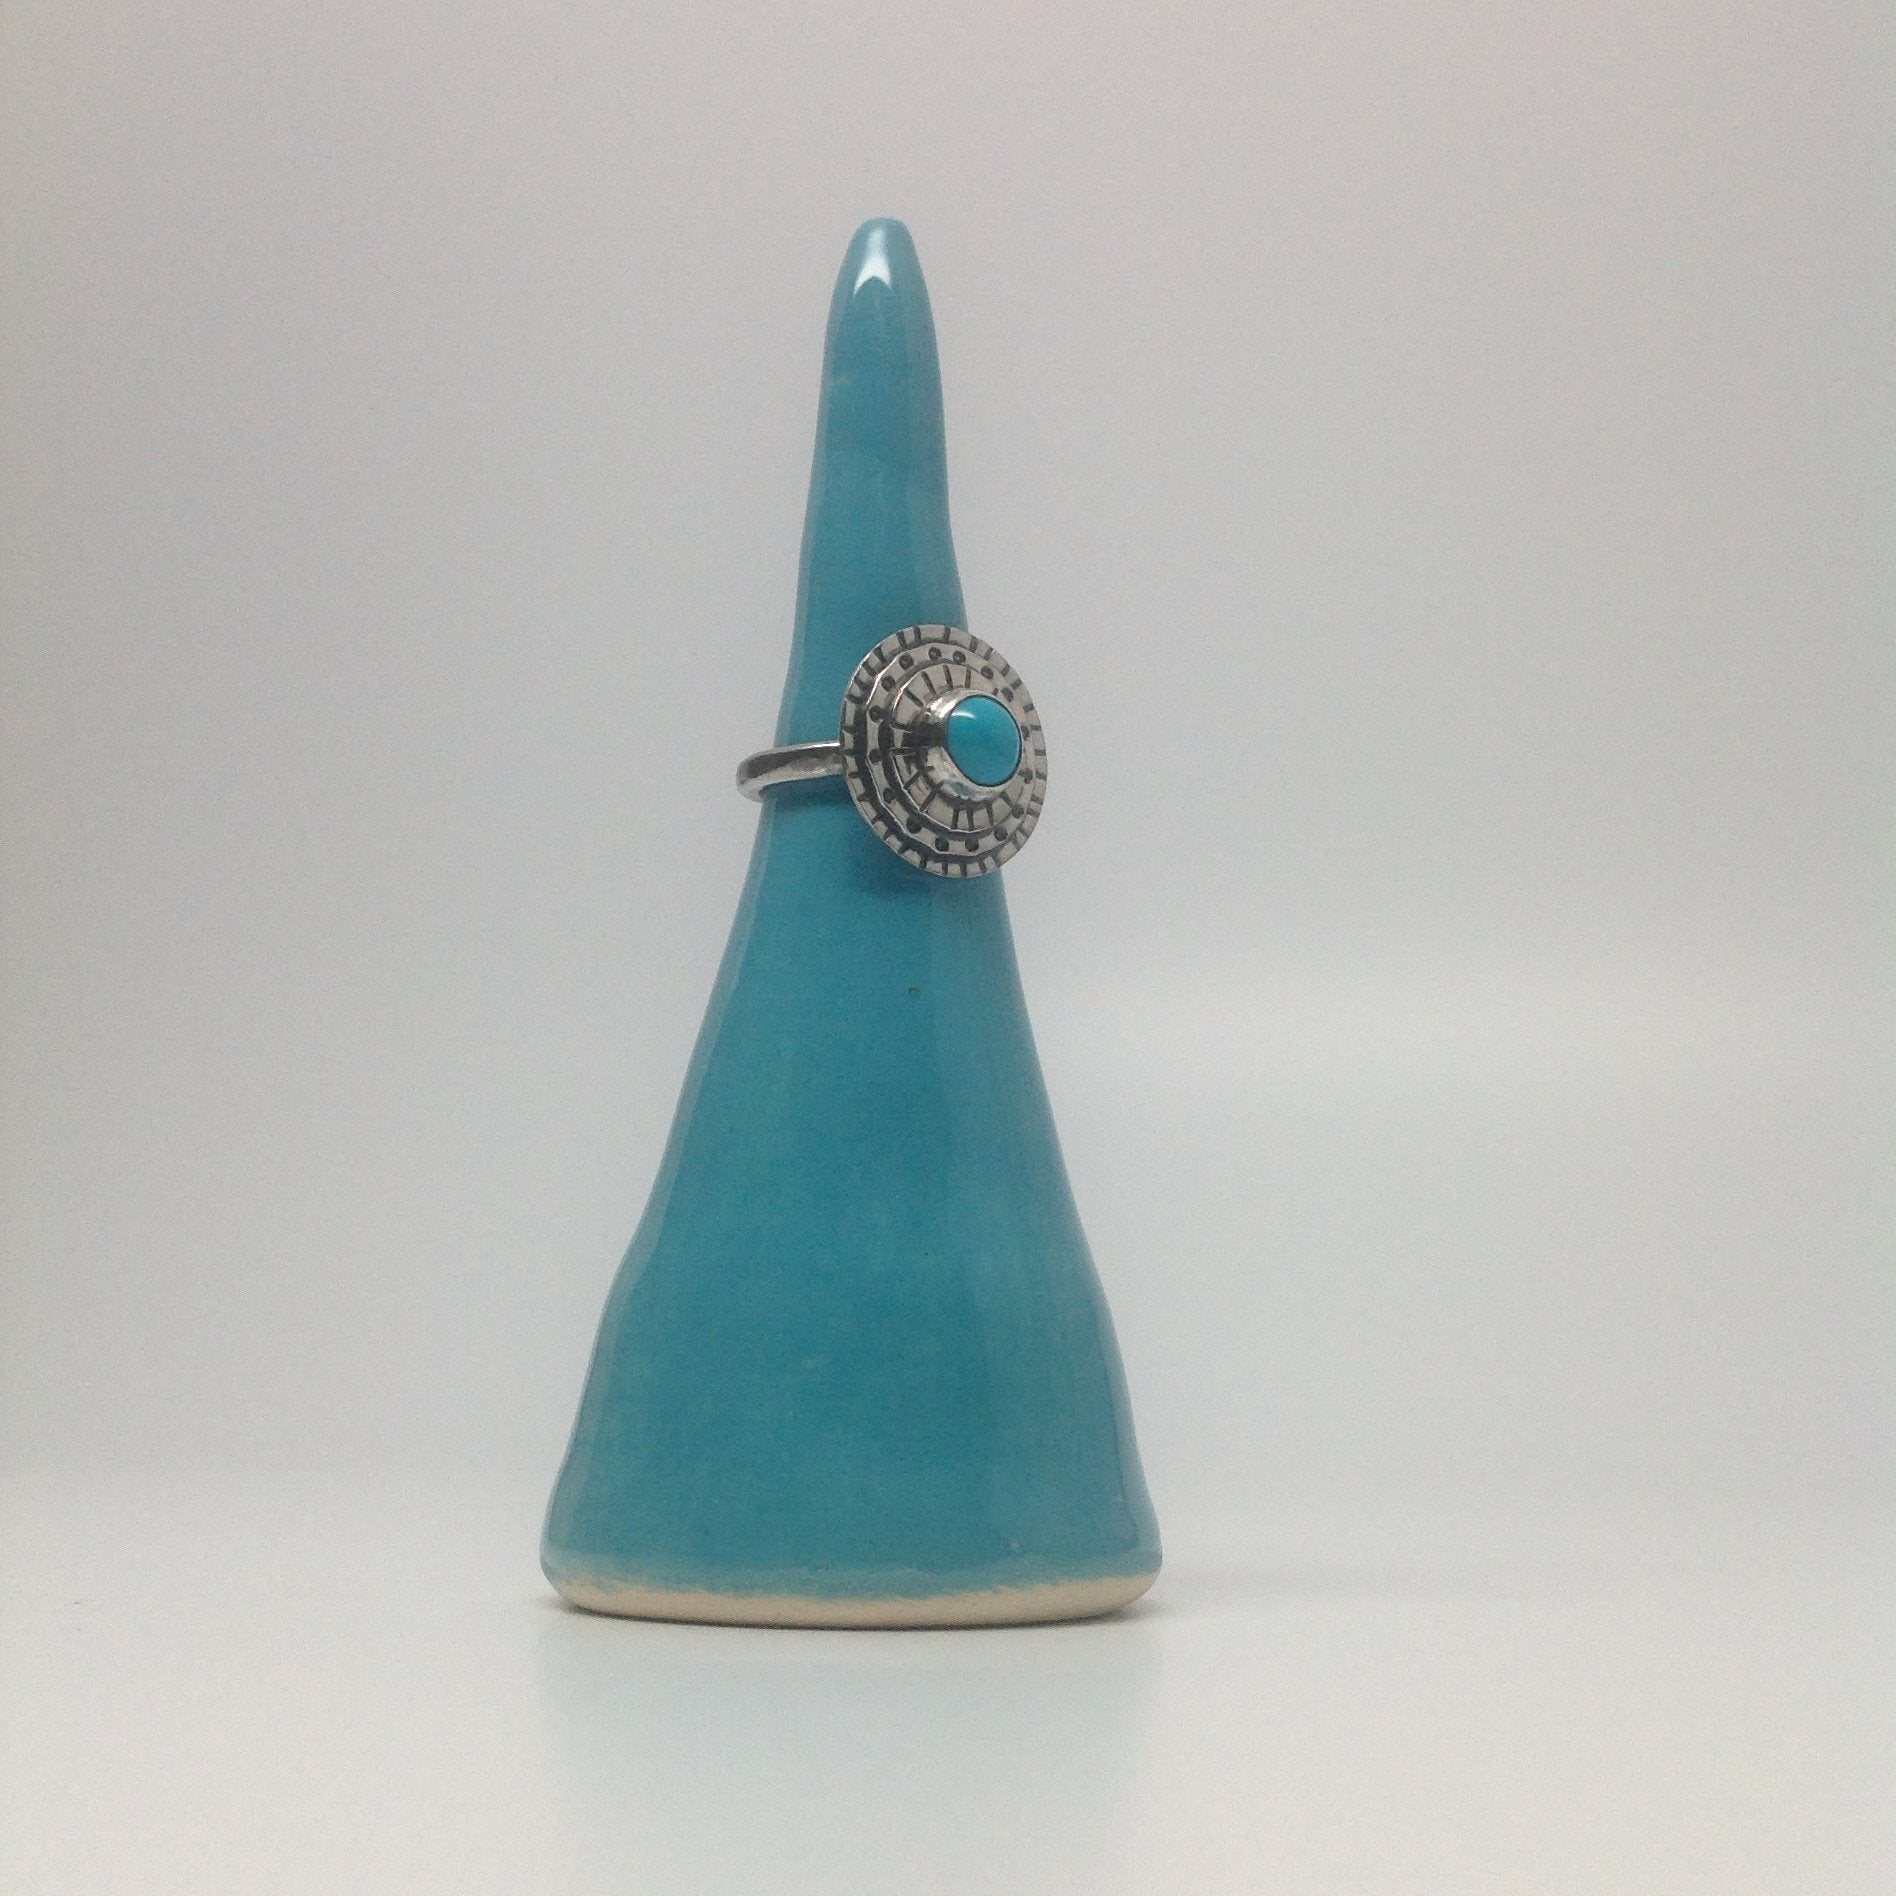 Three Layer Sleeping Beauty Turquoise Ring (size 7.25)